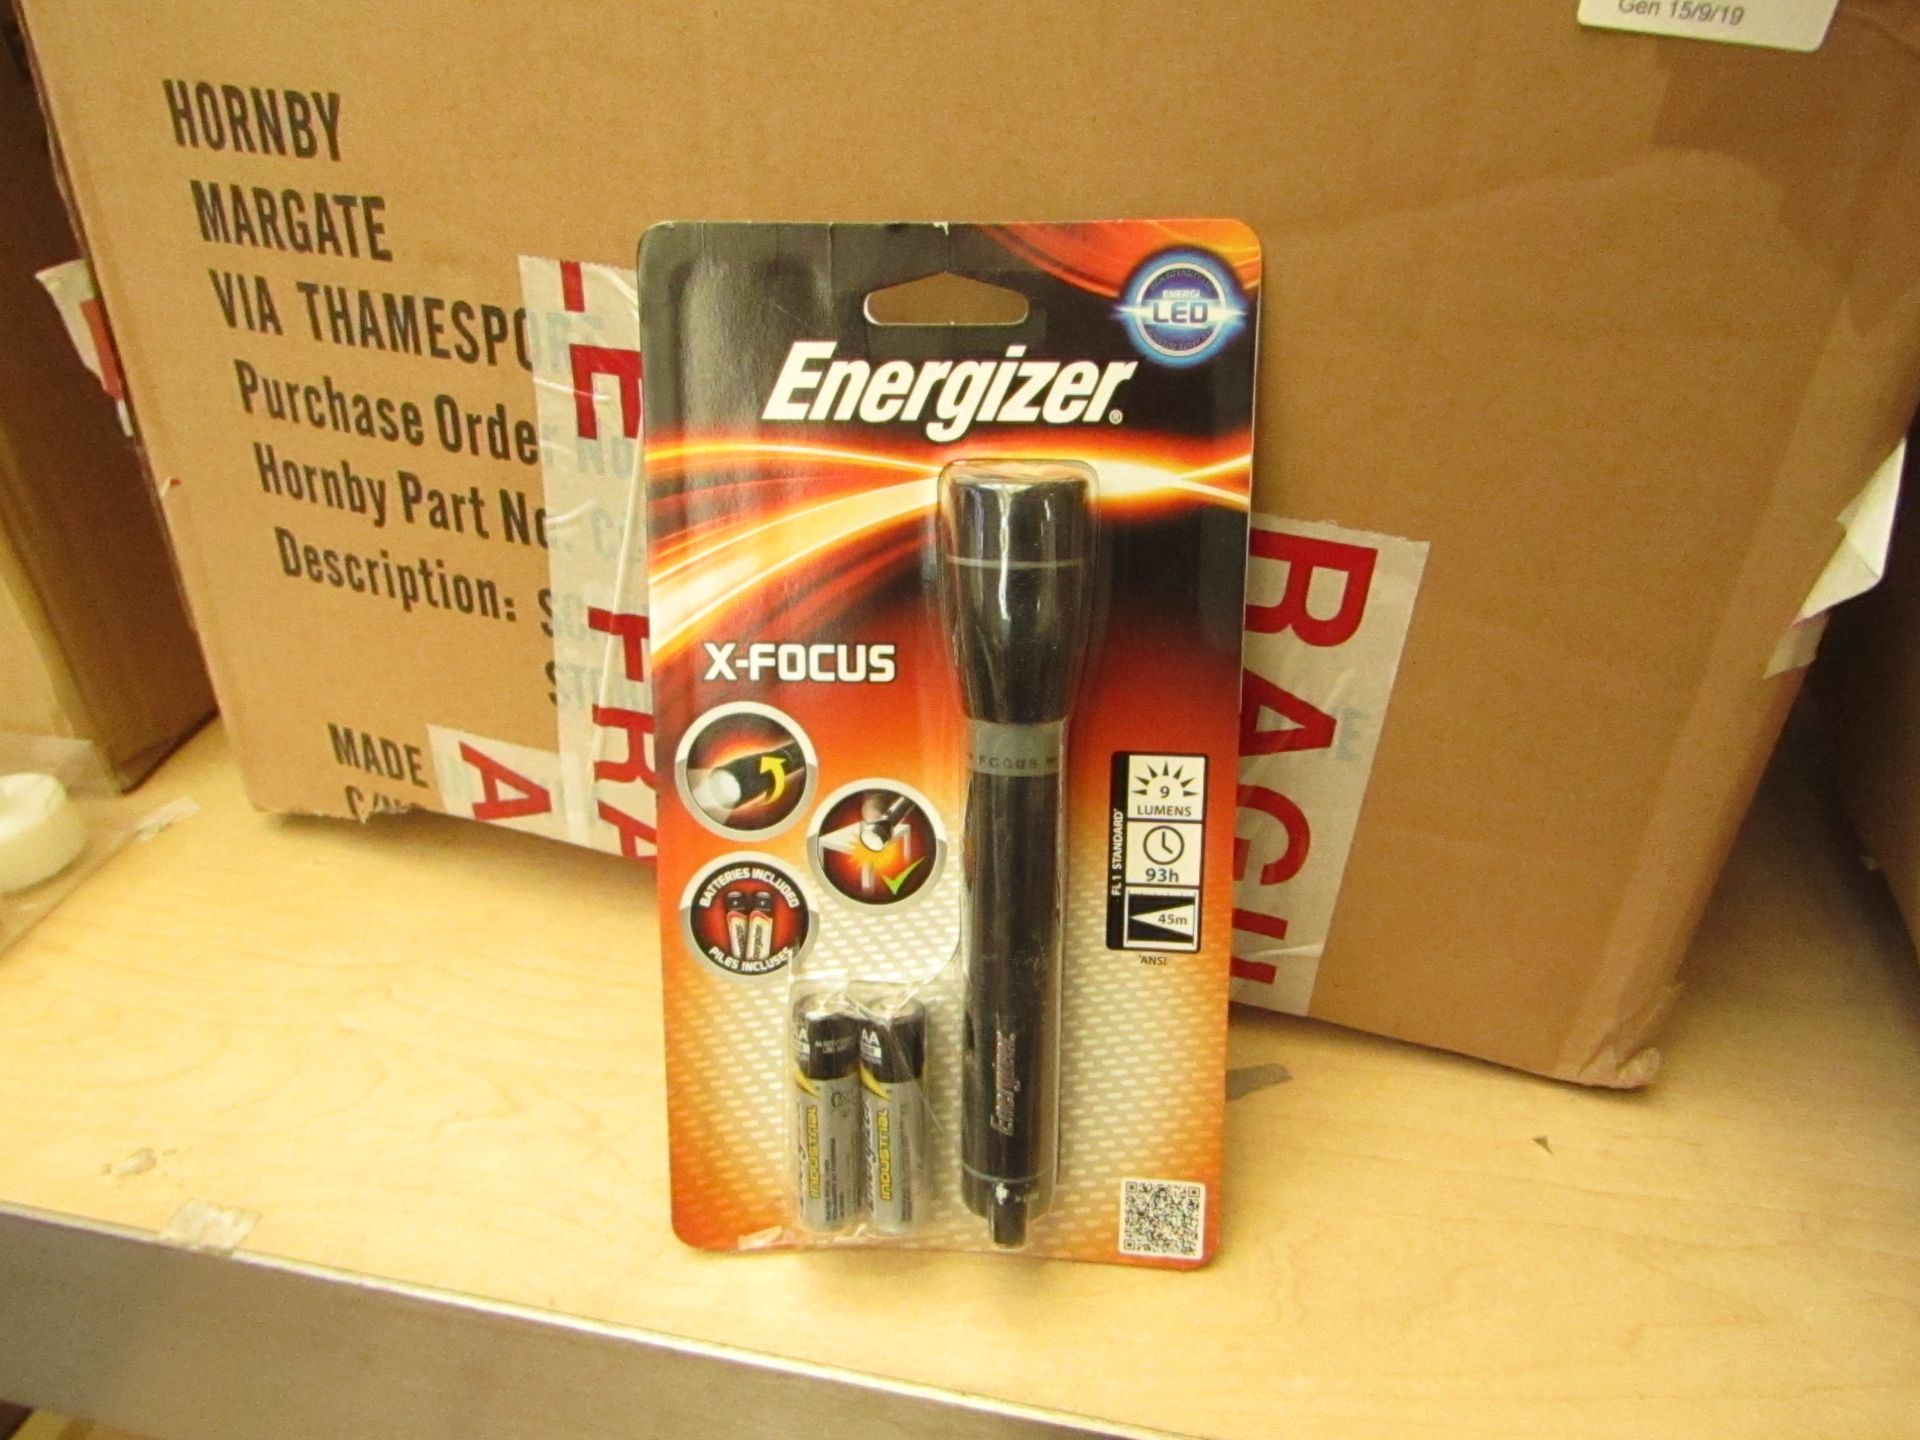 2 x Energizer X-Focus Torches with Batteries in packaging